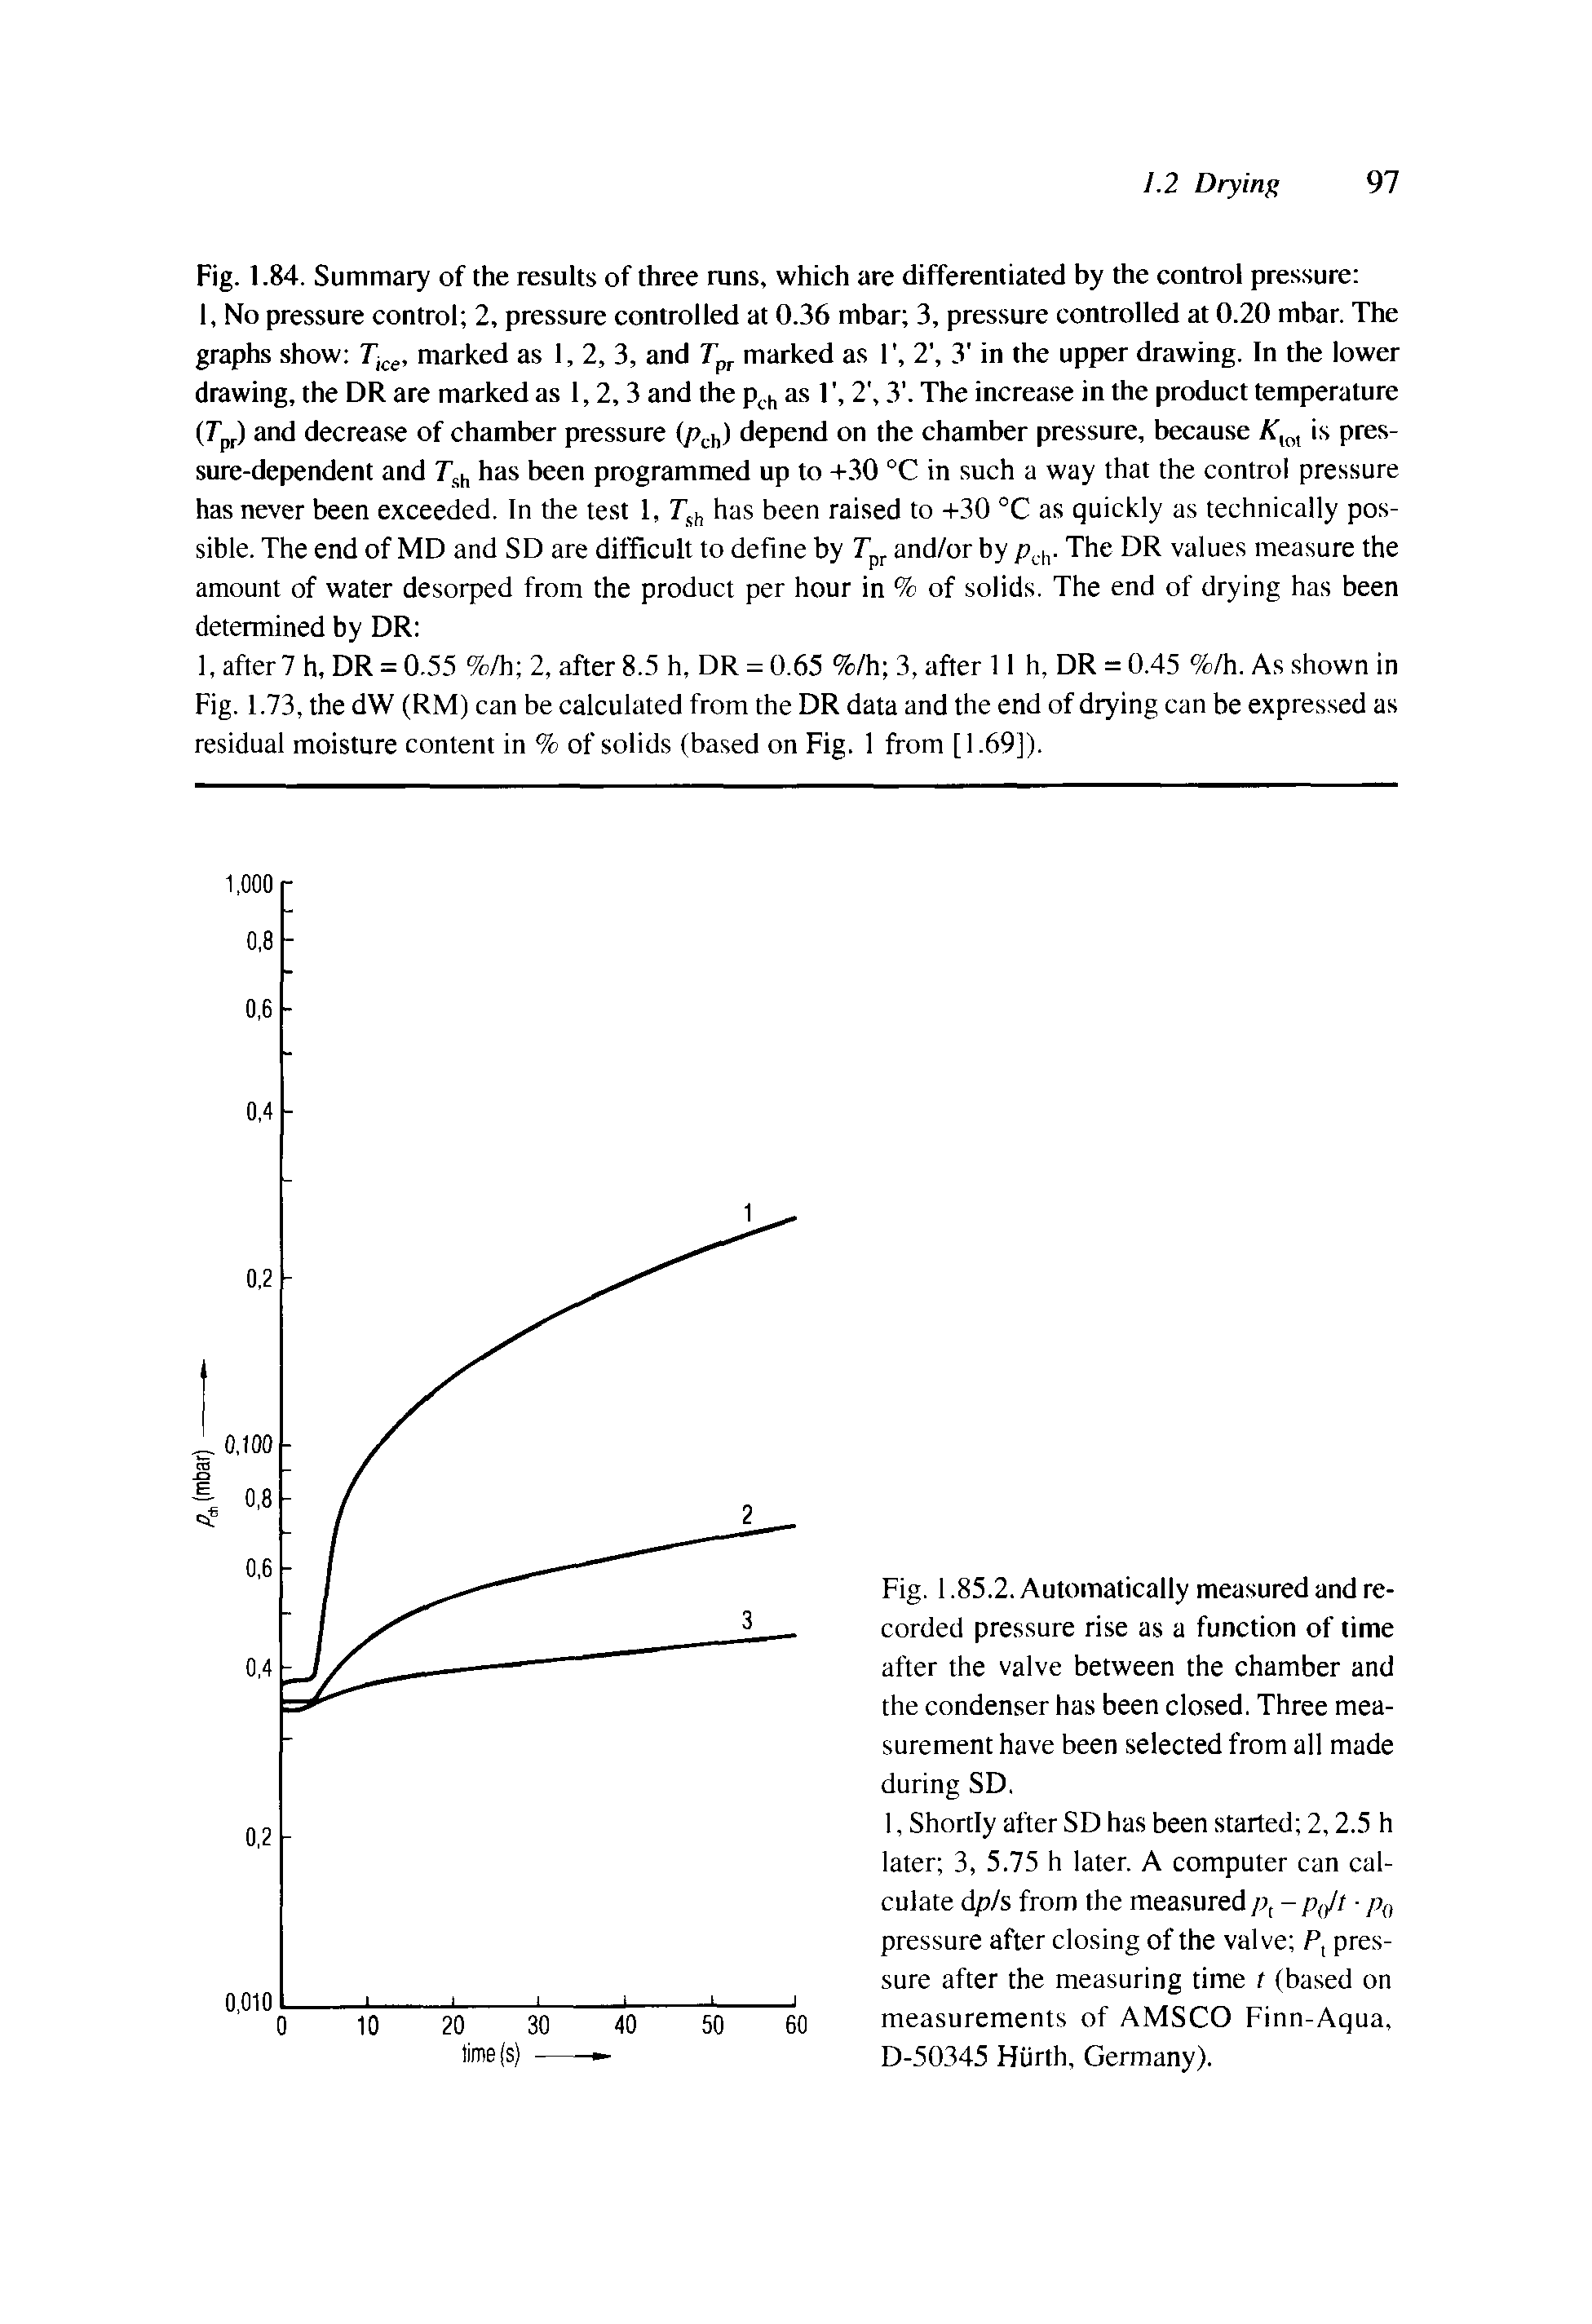 Fig. 1.85.2. Automatically measured and recorded pressure rise as a function of time after the valve between the chamber and the condenser has been closed. Three measurement have been selected from all made during SD.